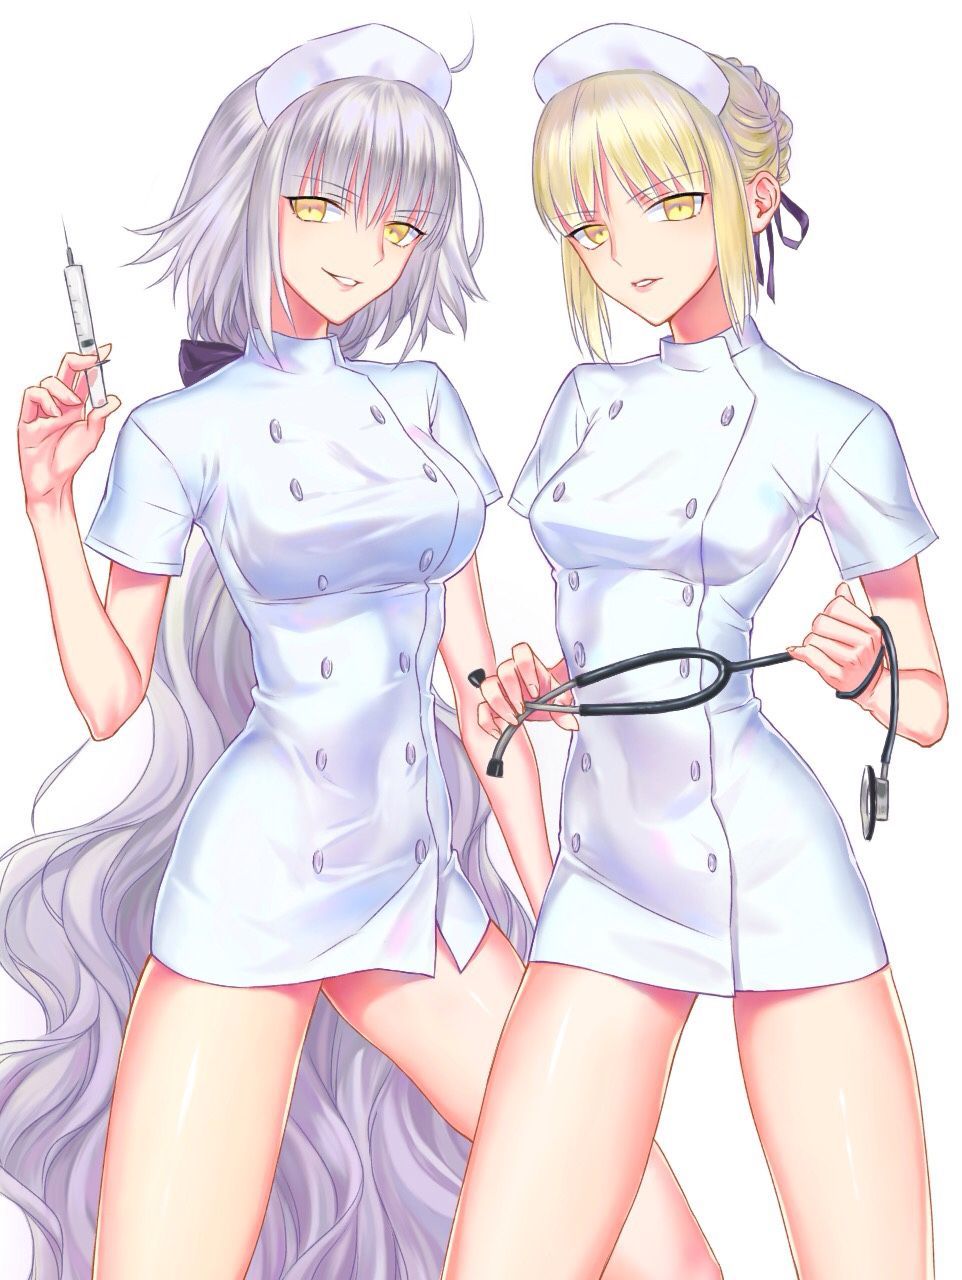 You want to see images of nurses, don't you? 3